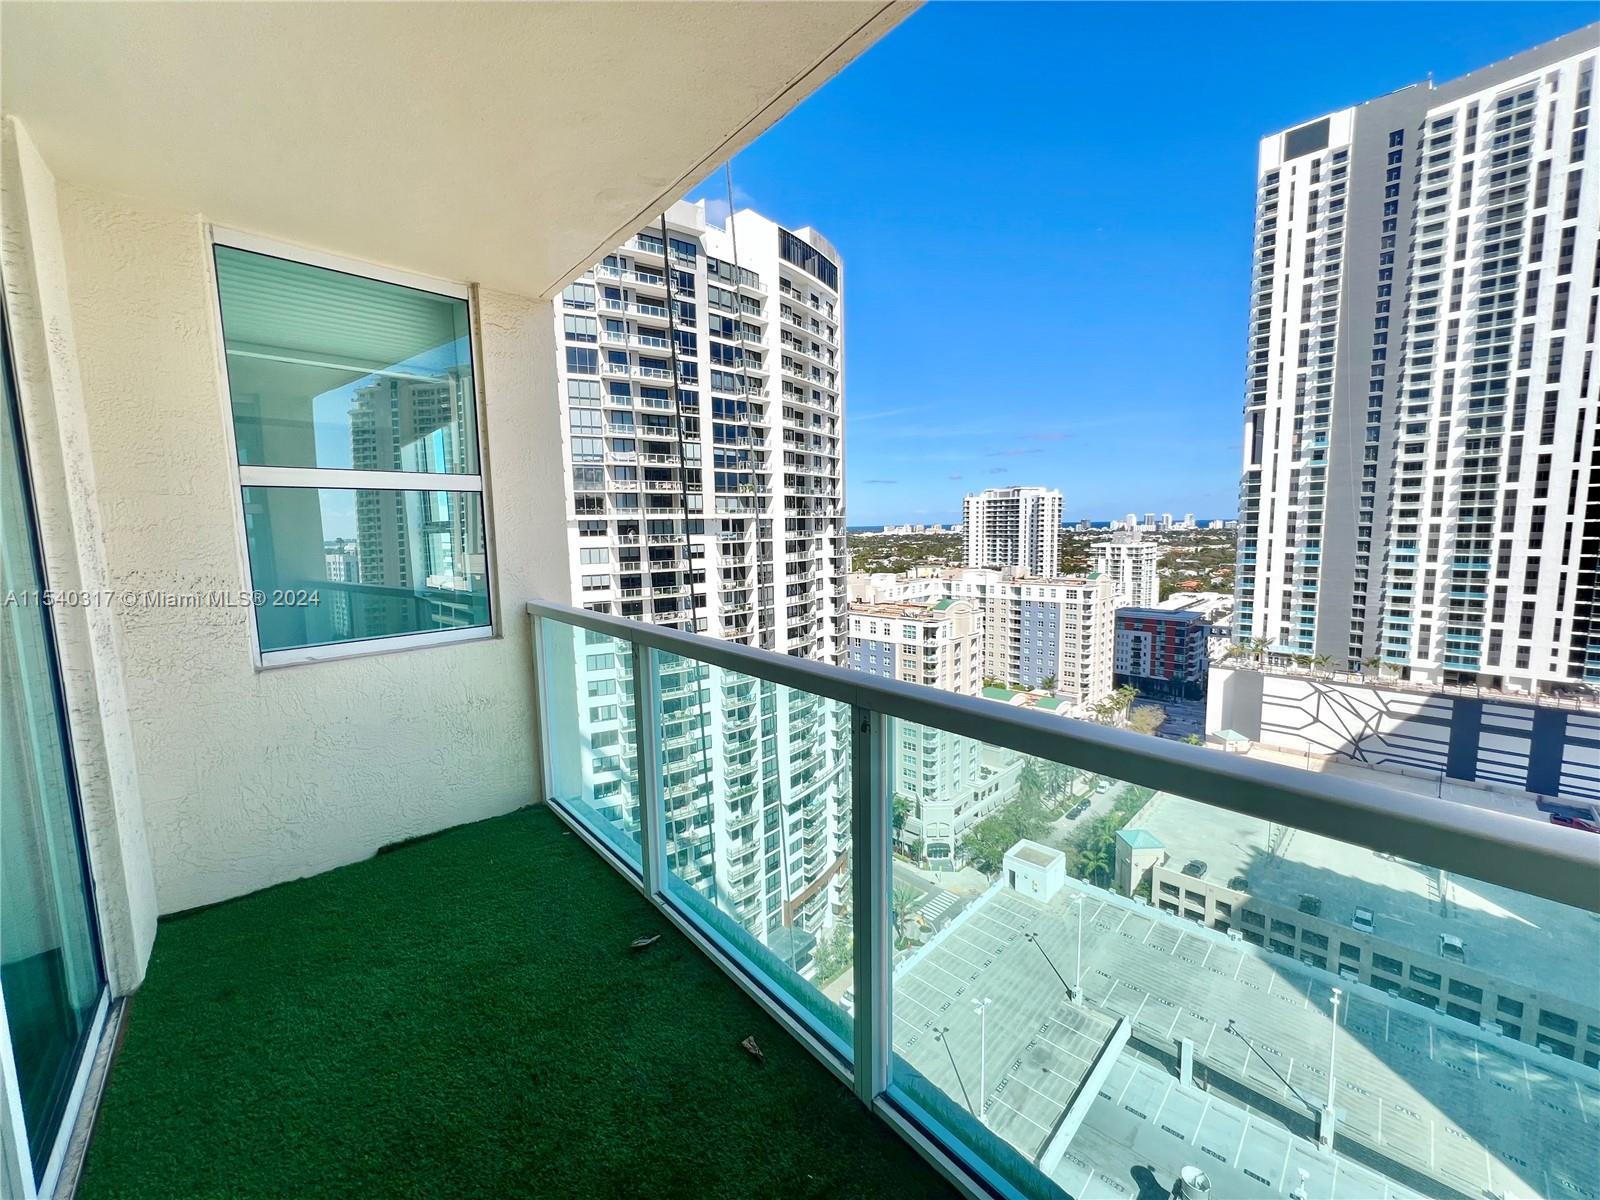 Photo of 350 SE 2nd St #2340 in Fort Lauderdale, FL